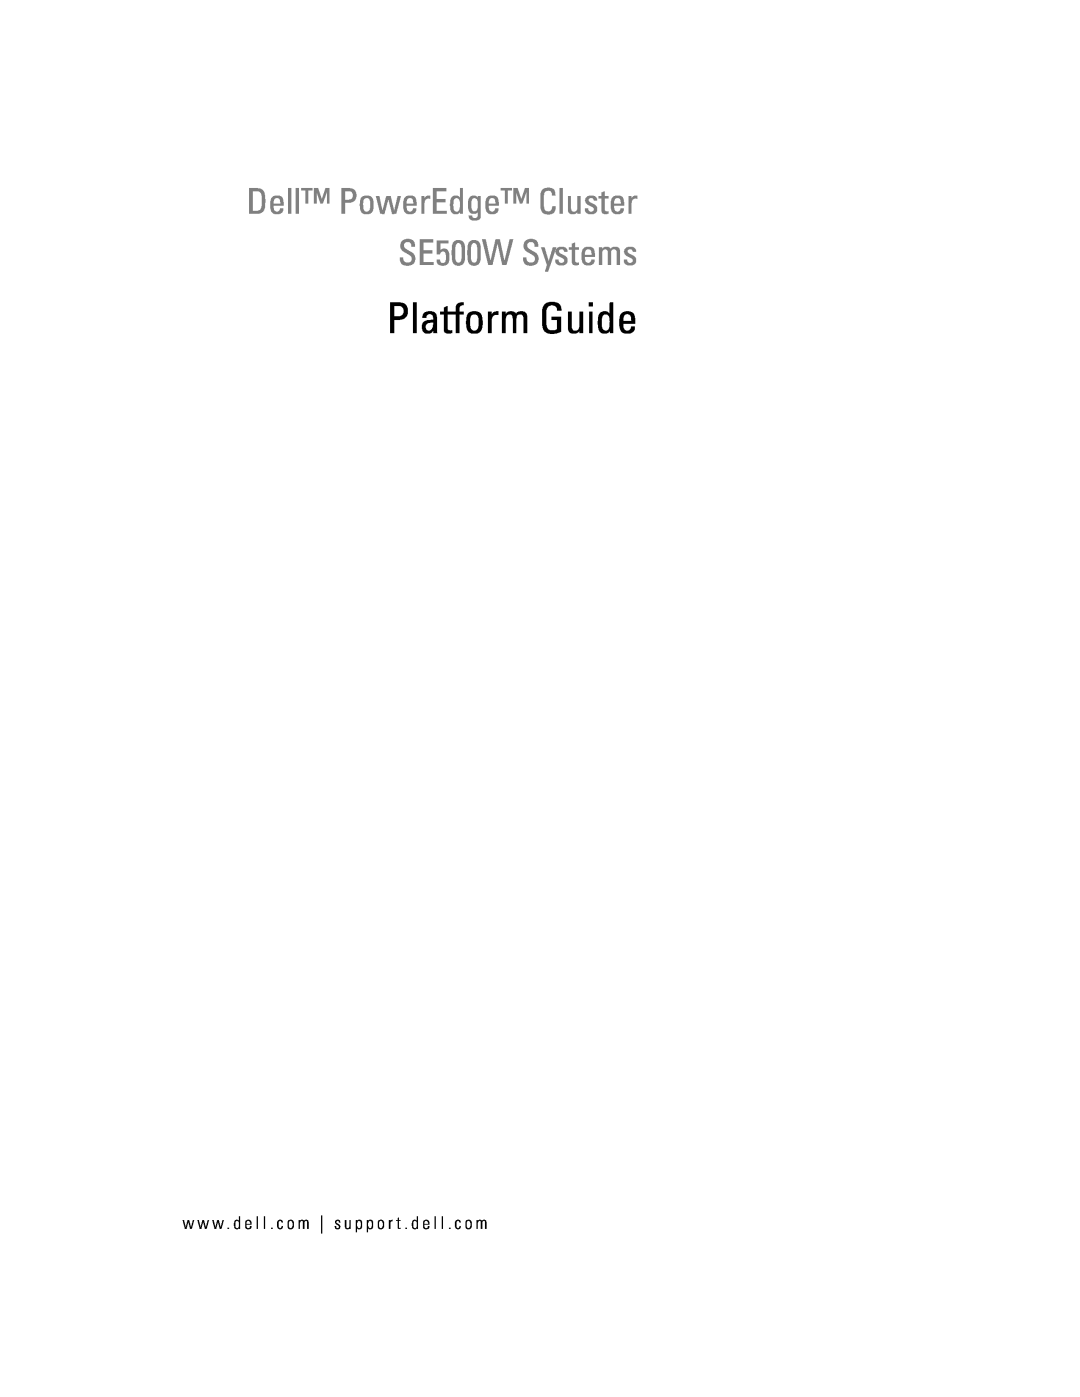 Dell manual Platform Guide, Dell PowerEdge Cluster SE500W Systems 